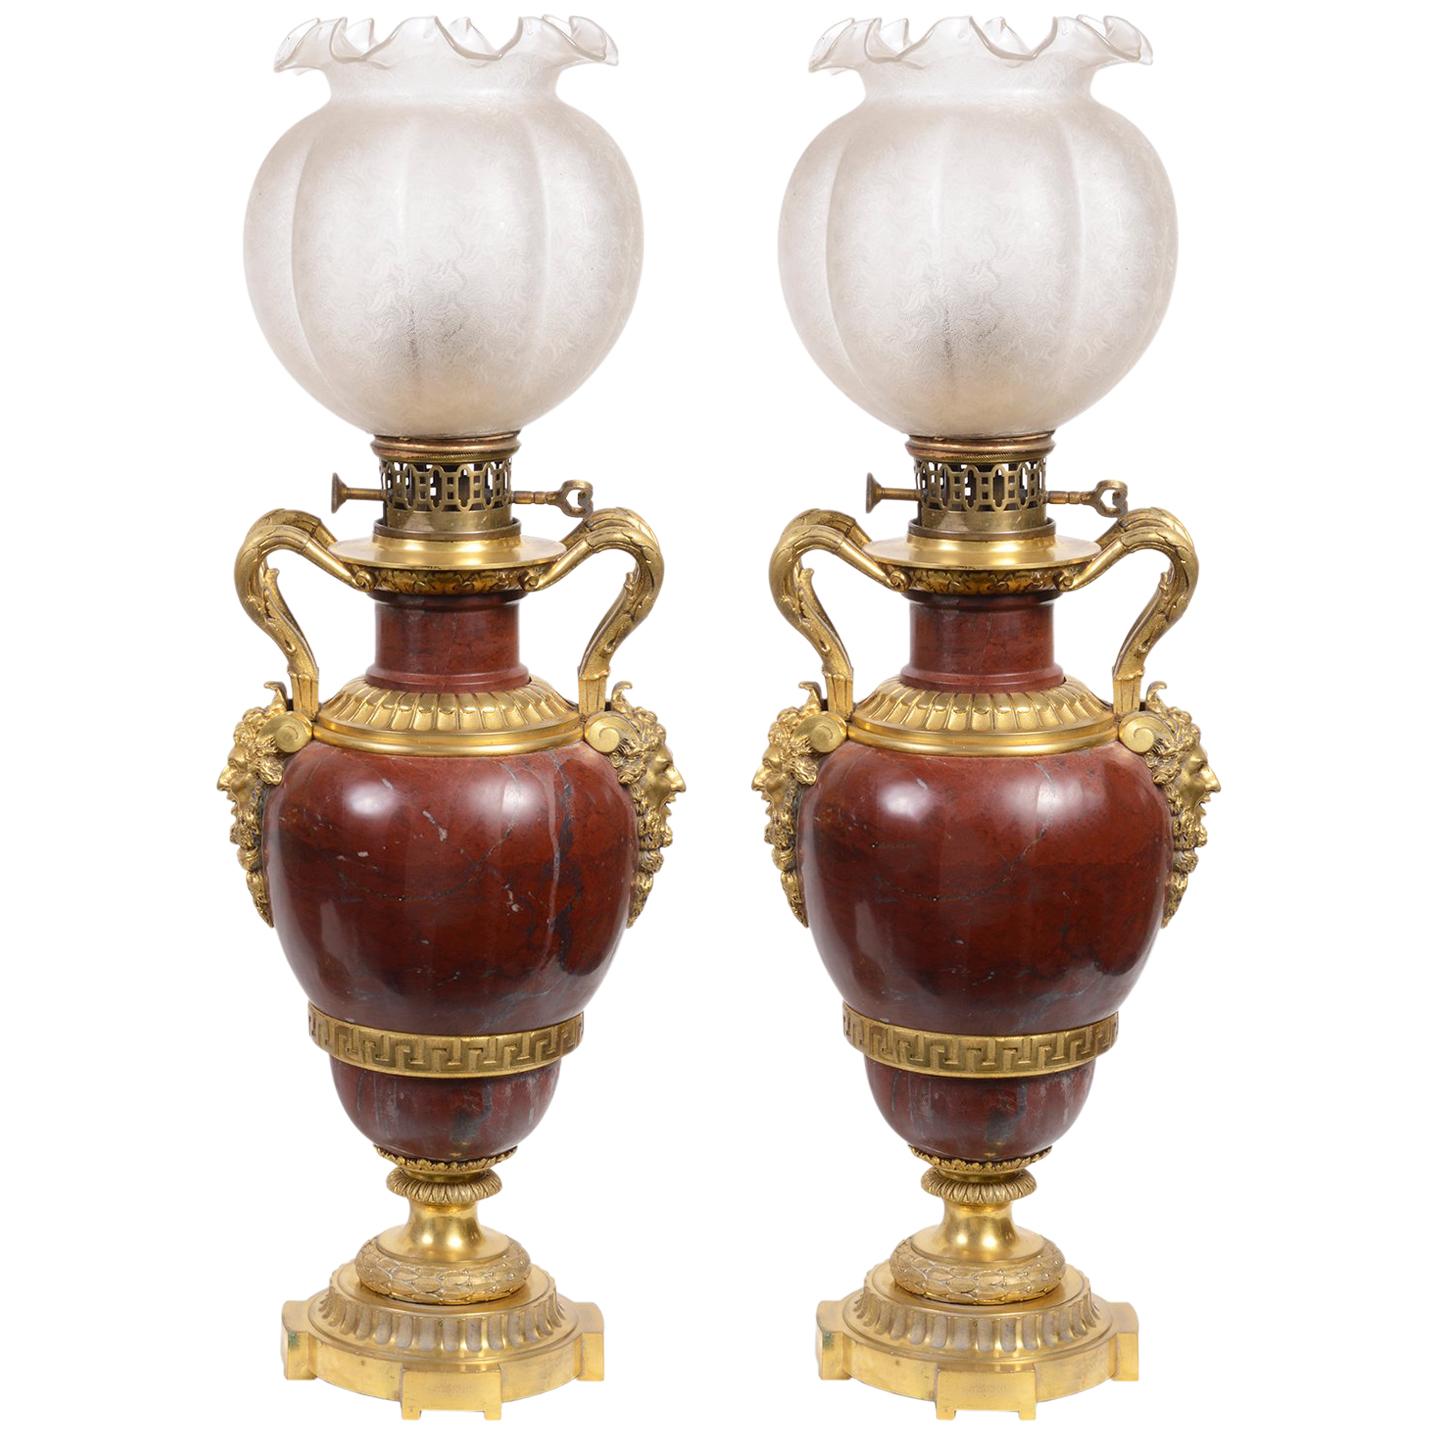 Impressive Pair of 19th Century Classical Marble Lamps